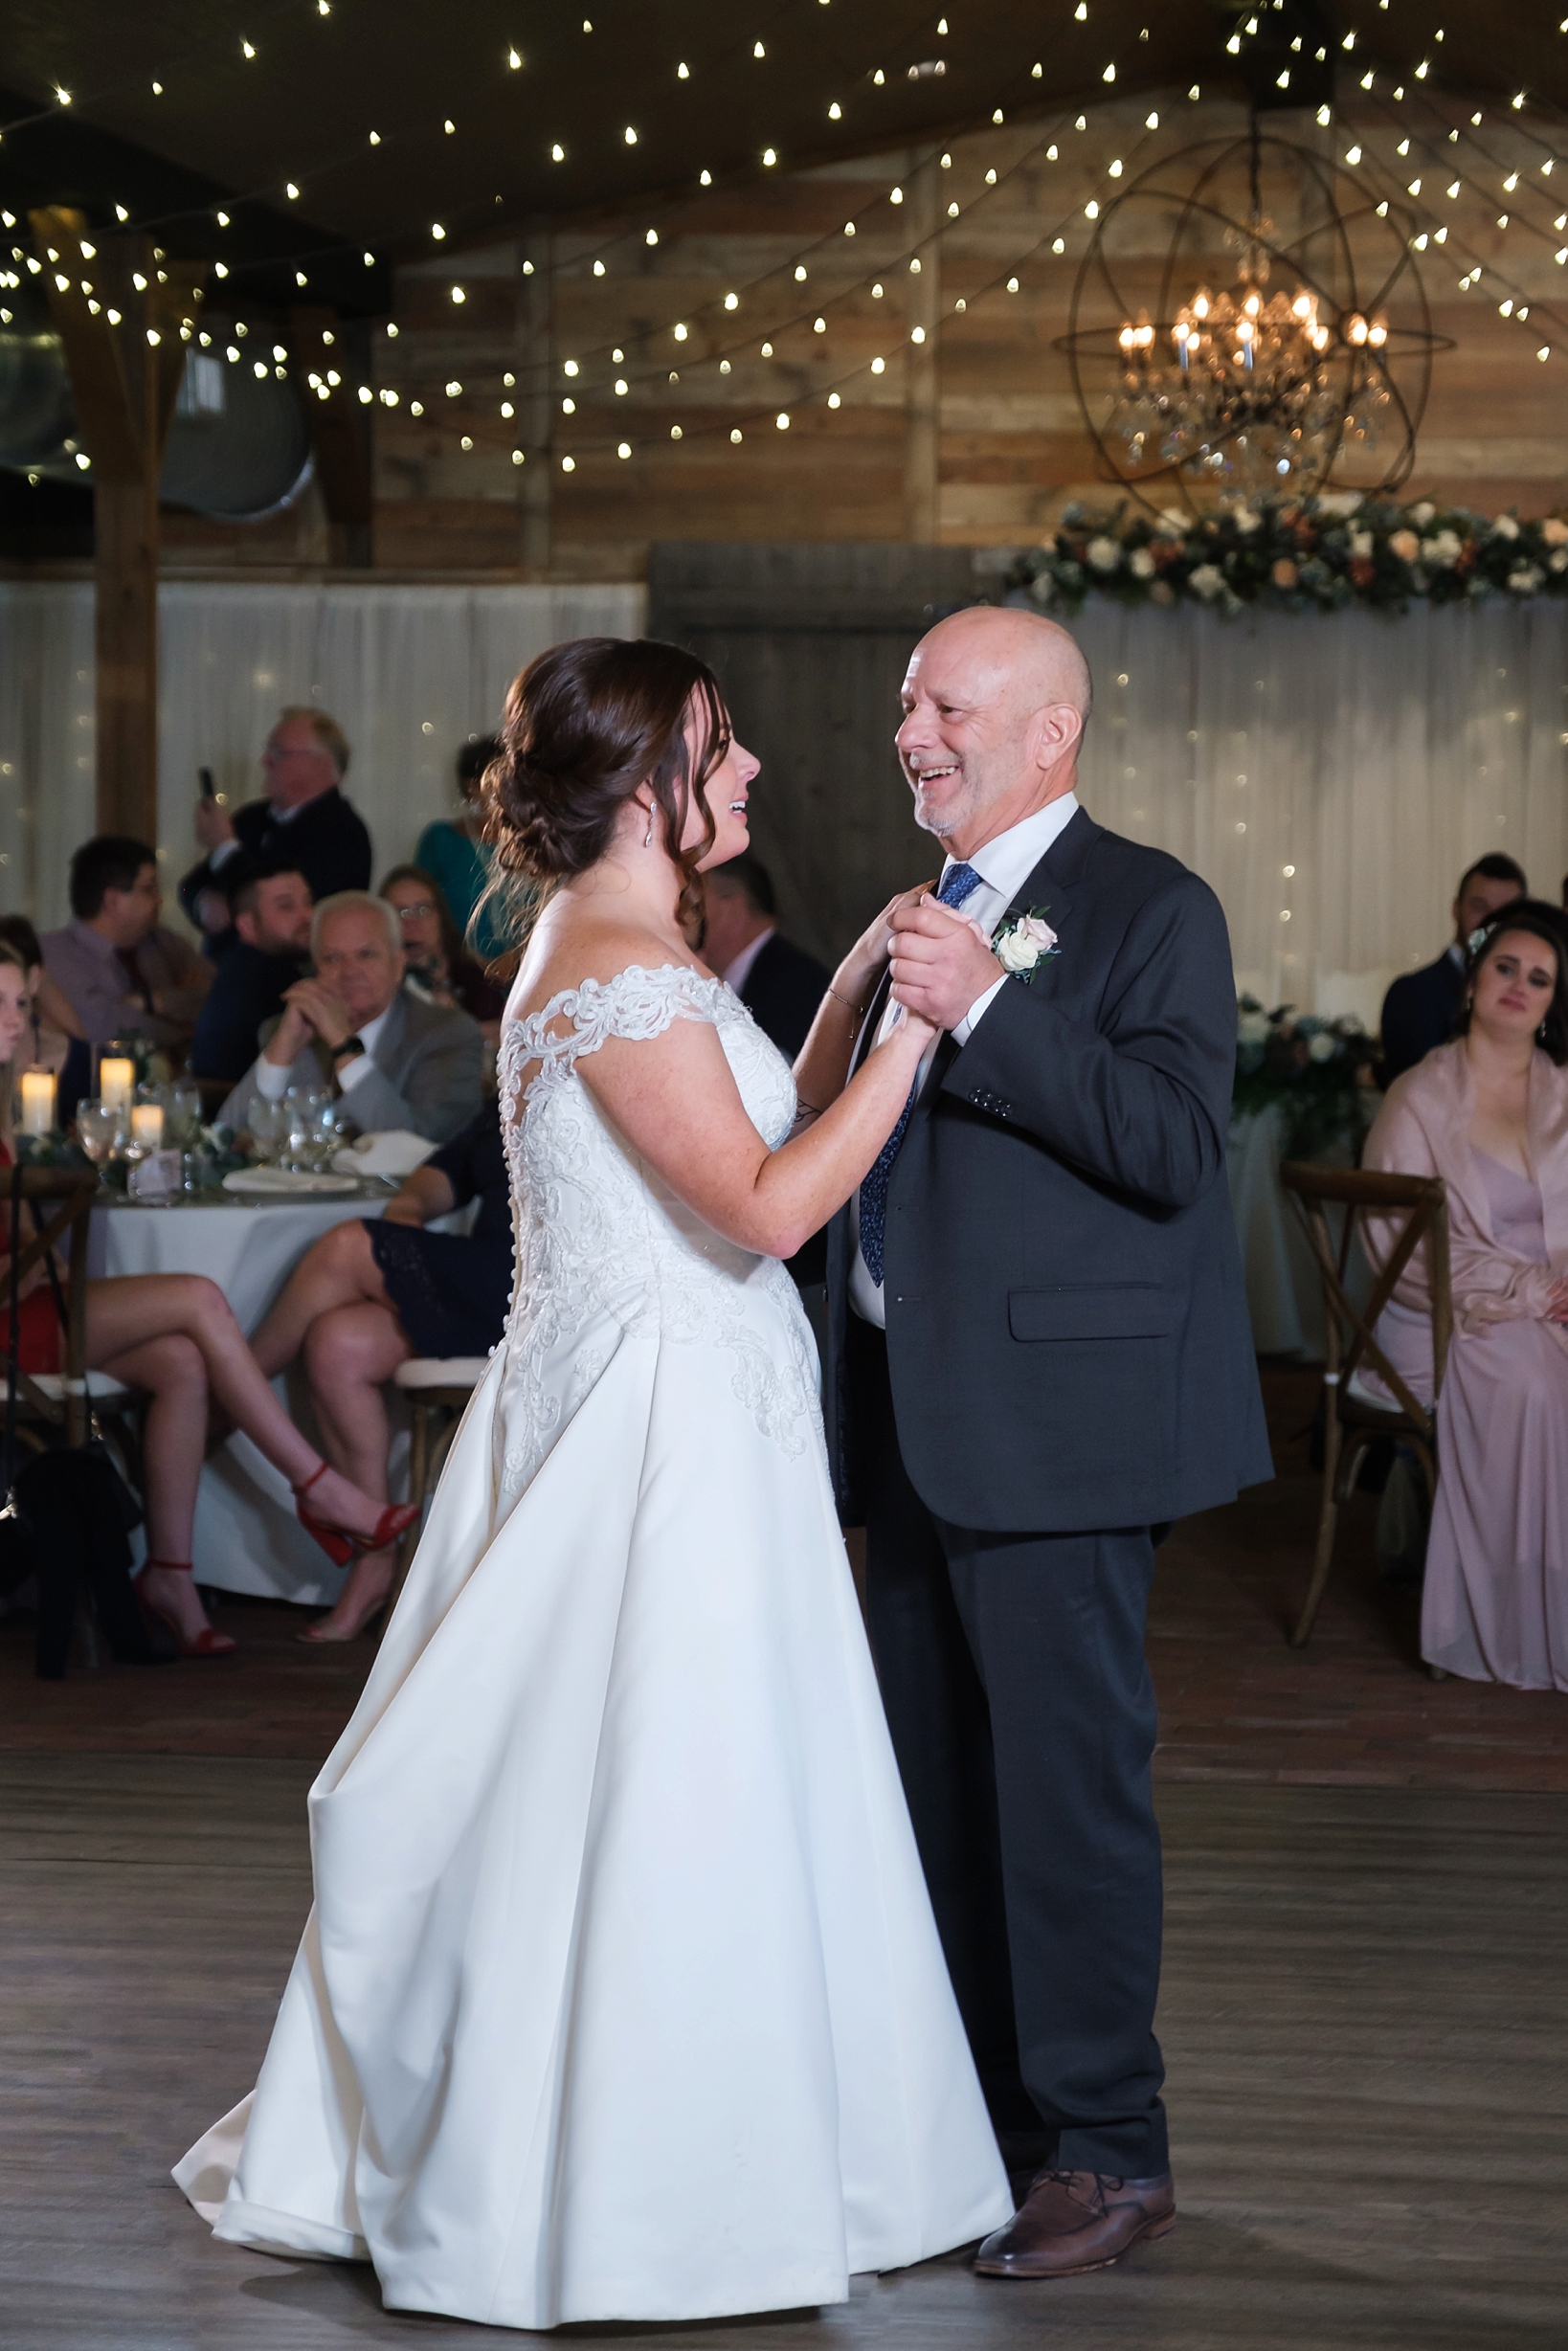 The Bride and her Father dance under the string lights of Cross Creek Ranch's reception barn